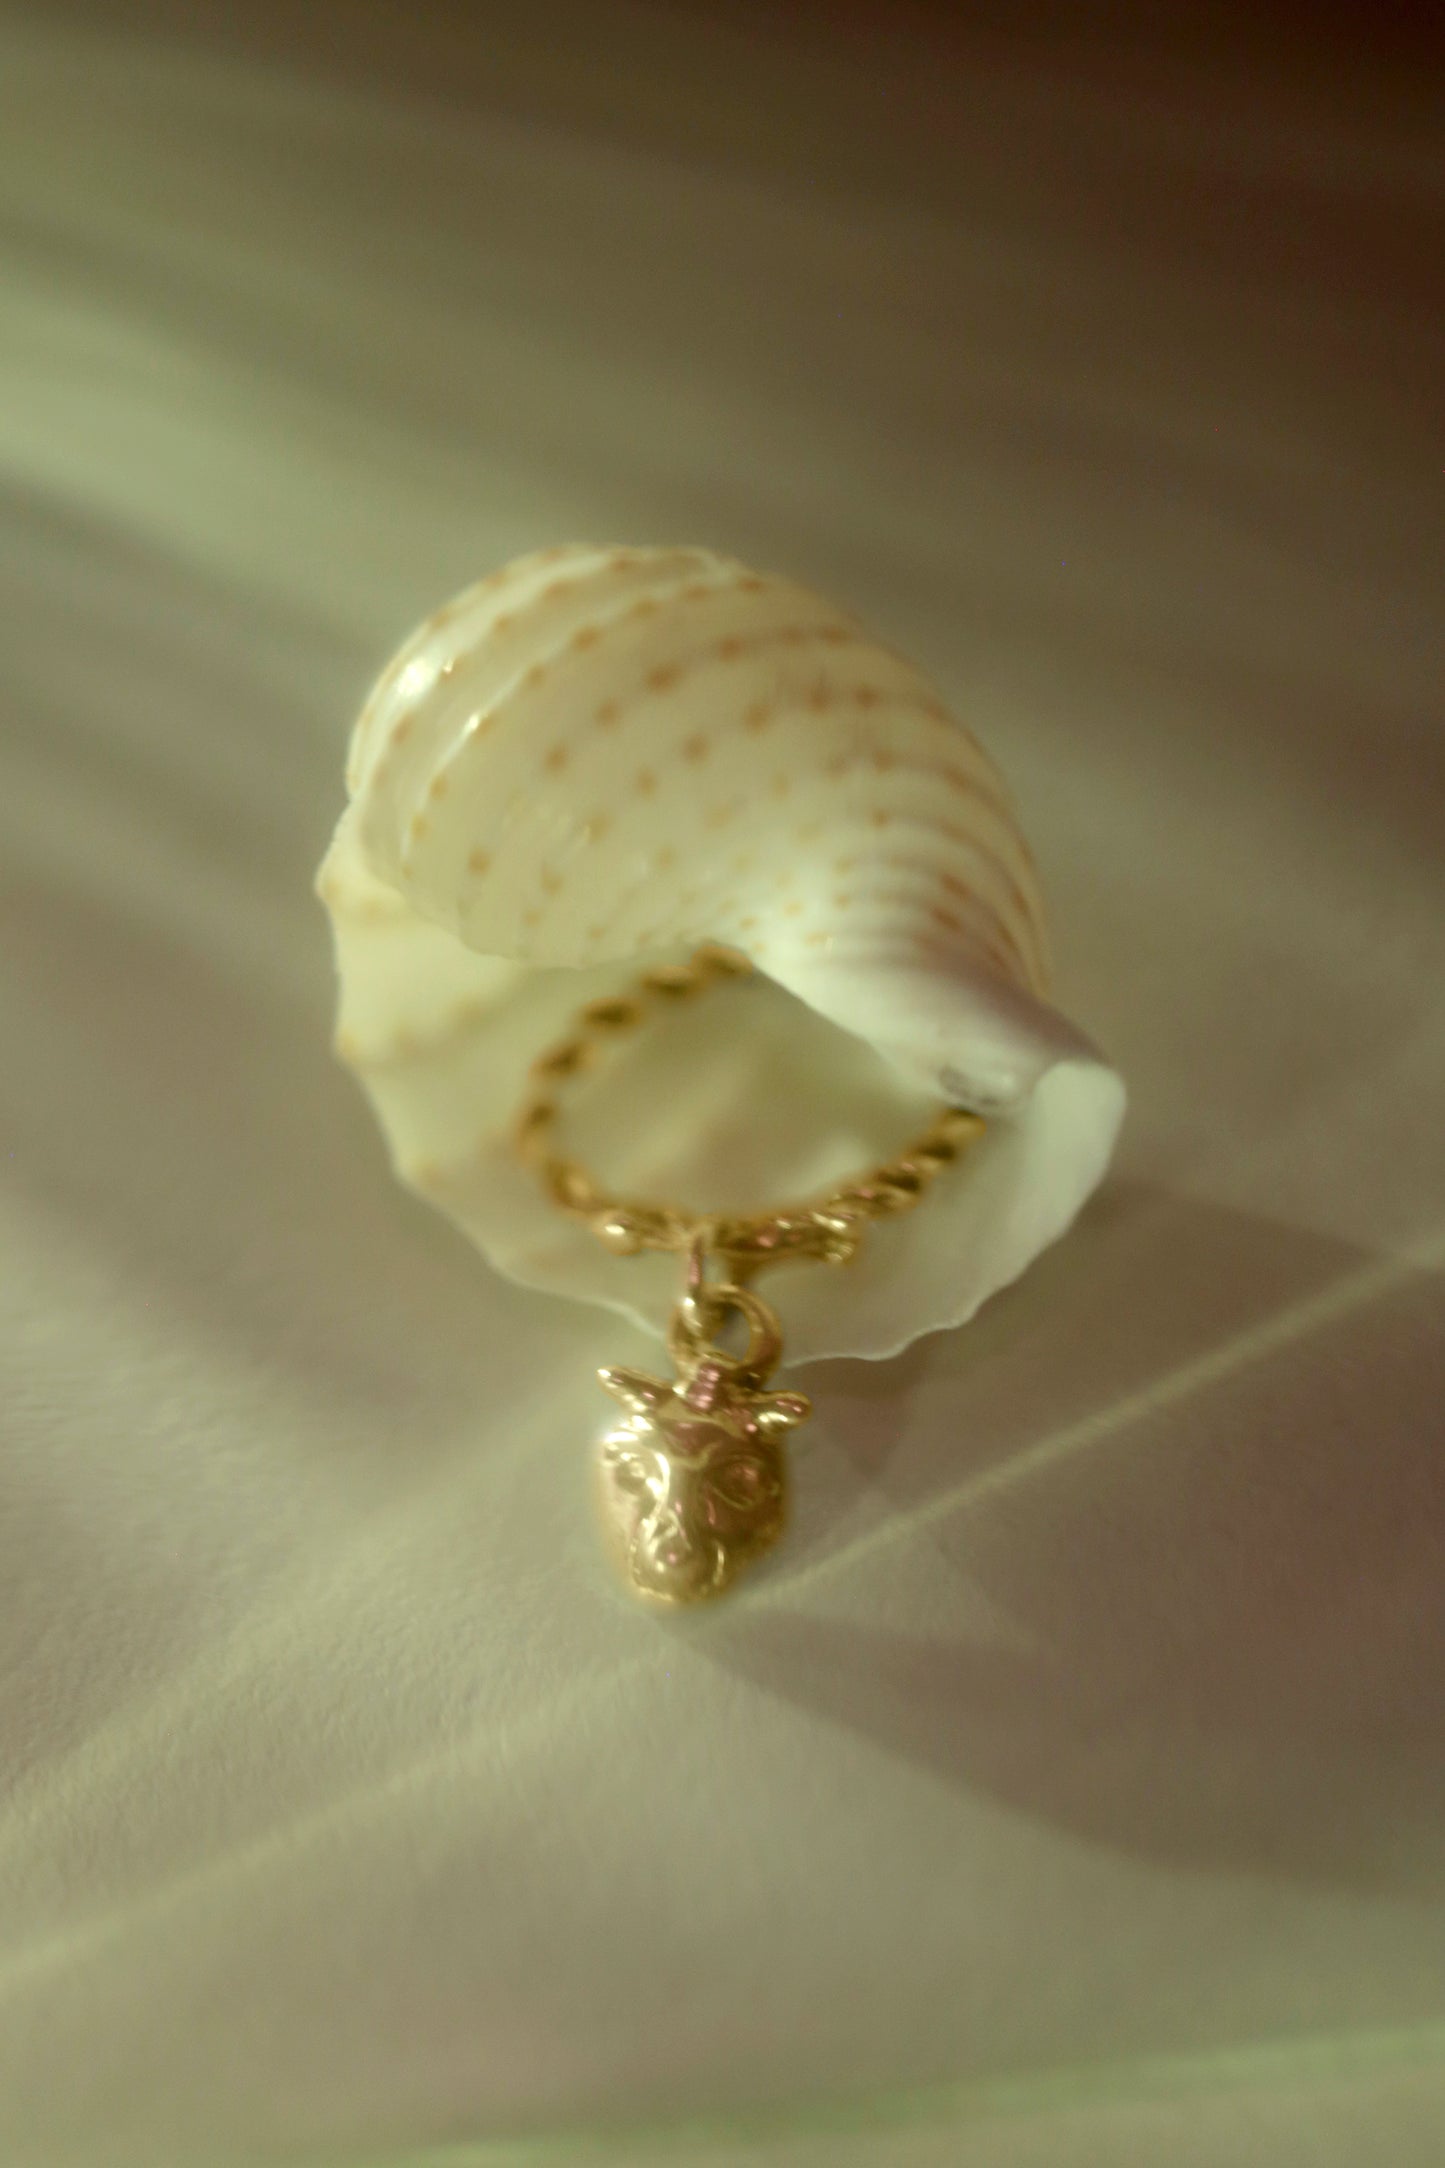 Mischievous Lilith Charm Ring by CLARK in 18K Gold Vermeil. Gold charm ring staged with seashell. A unique and artisanal statement gift, hand-made using the lost-wax-casting method.